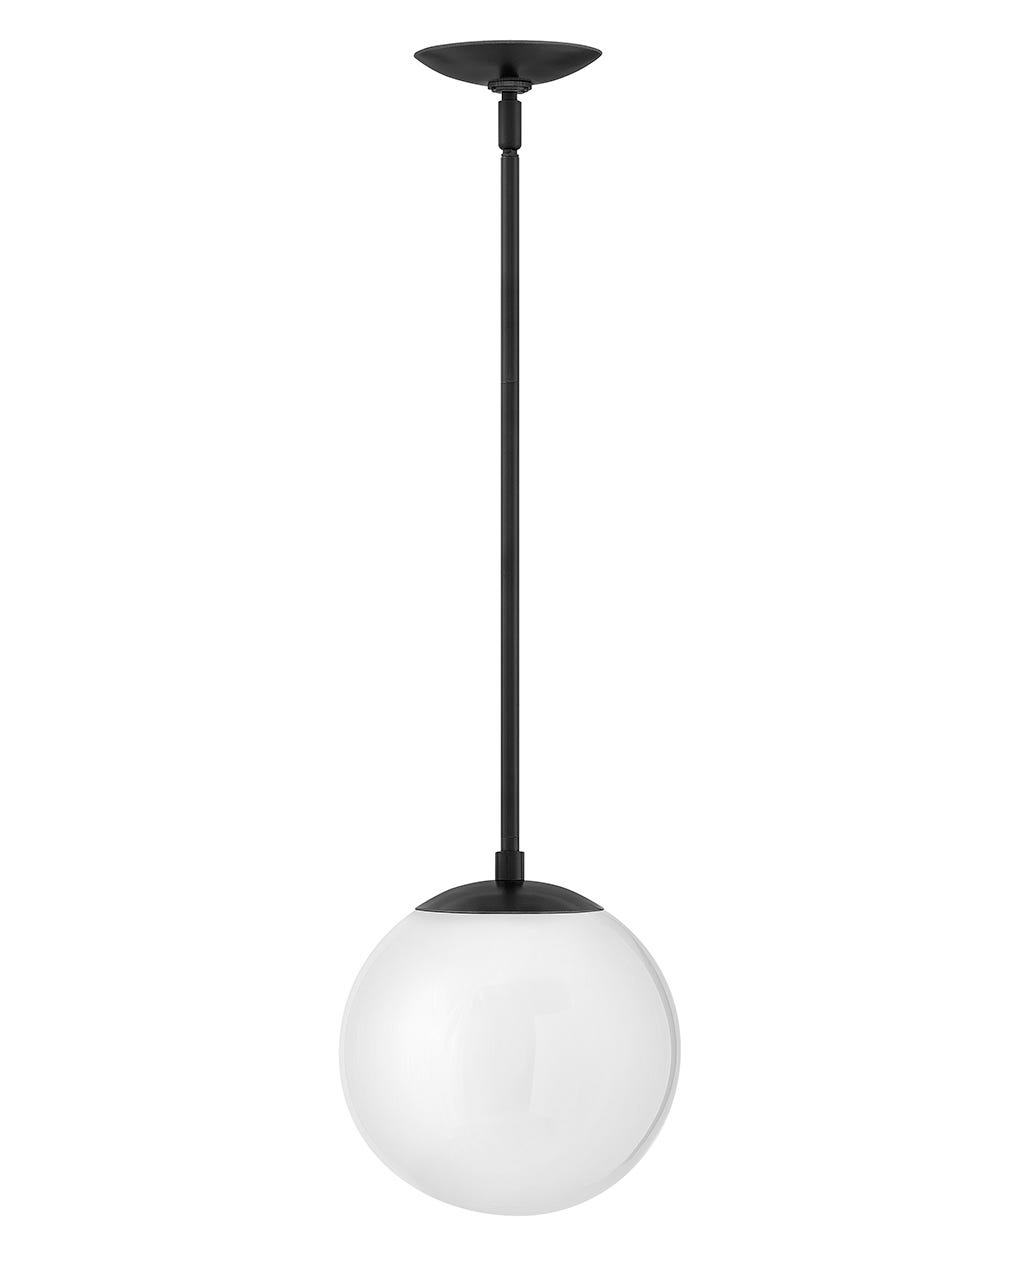 Hinkley Warby Pendant Pendant Hinkley Black with White glass 9.5x9.5x10.75 